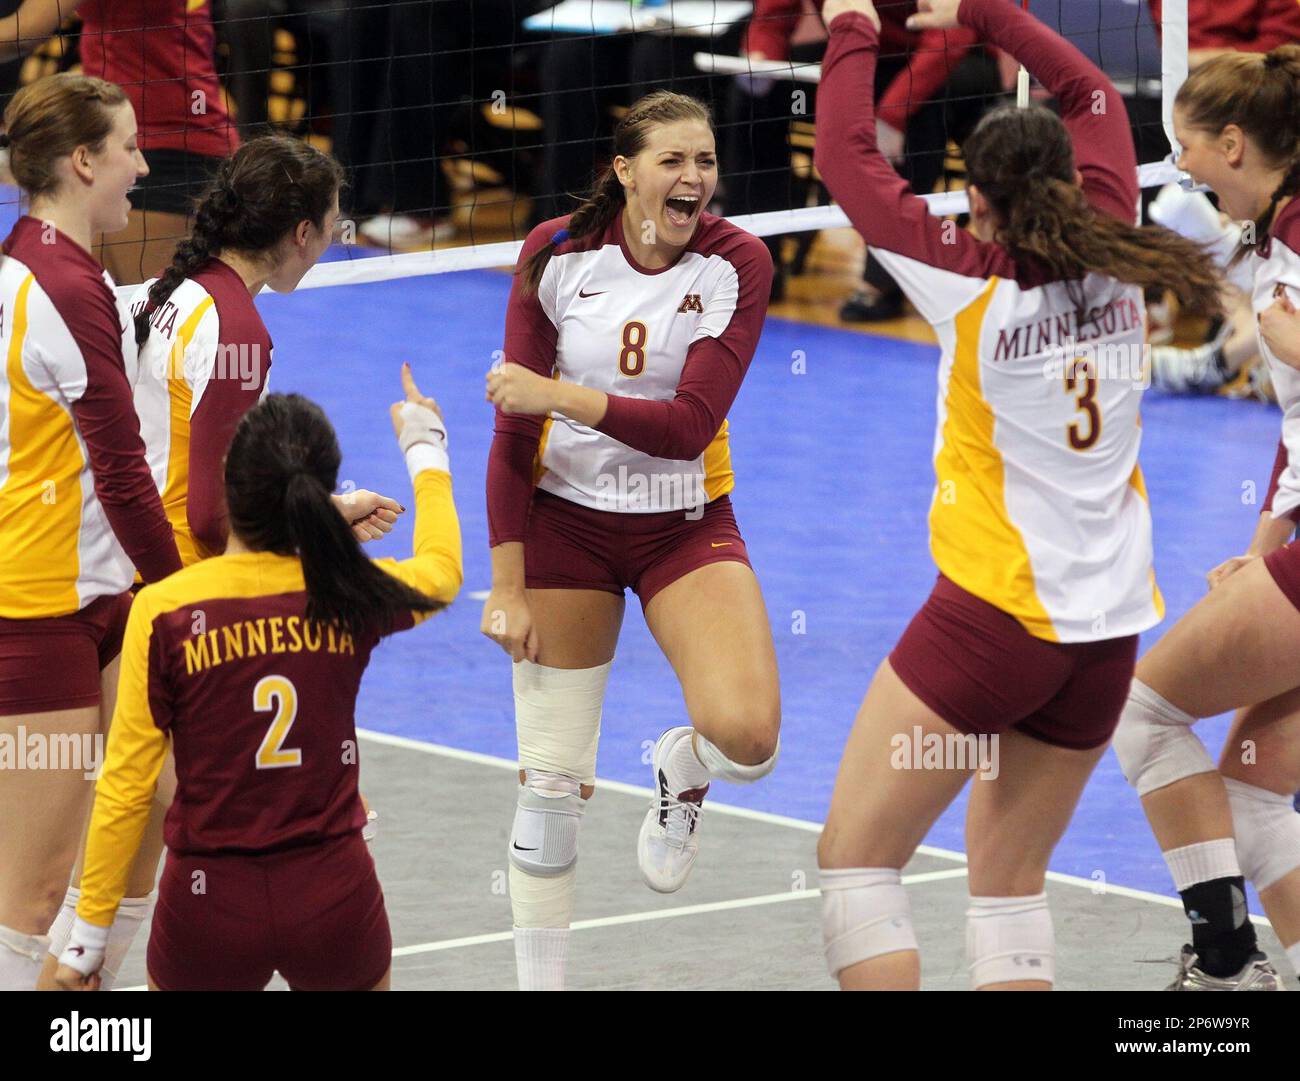 Minnesota players, including Katherine Harms (8), celebrate after winning a point during an NCAA college volleyball game against Iowa State in Minneapolis, Friday, Dec